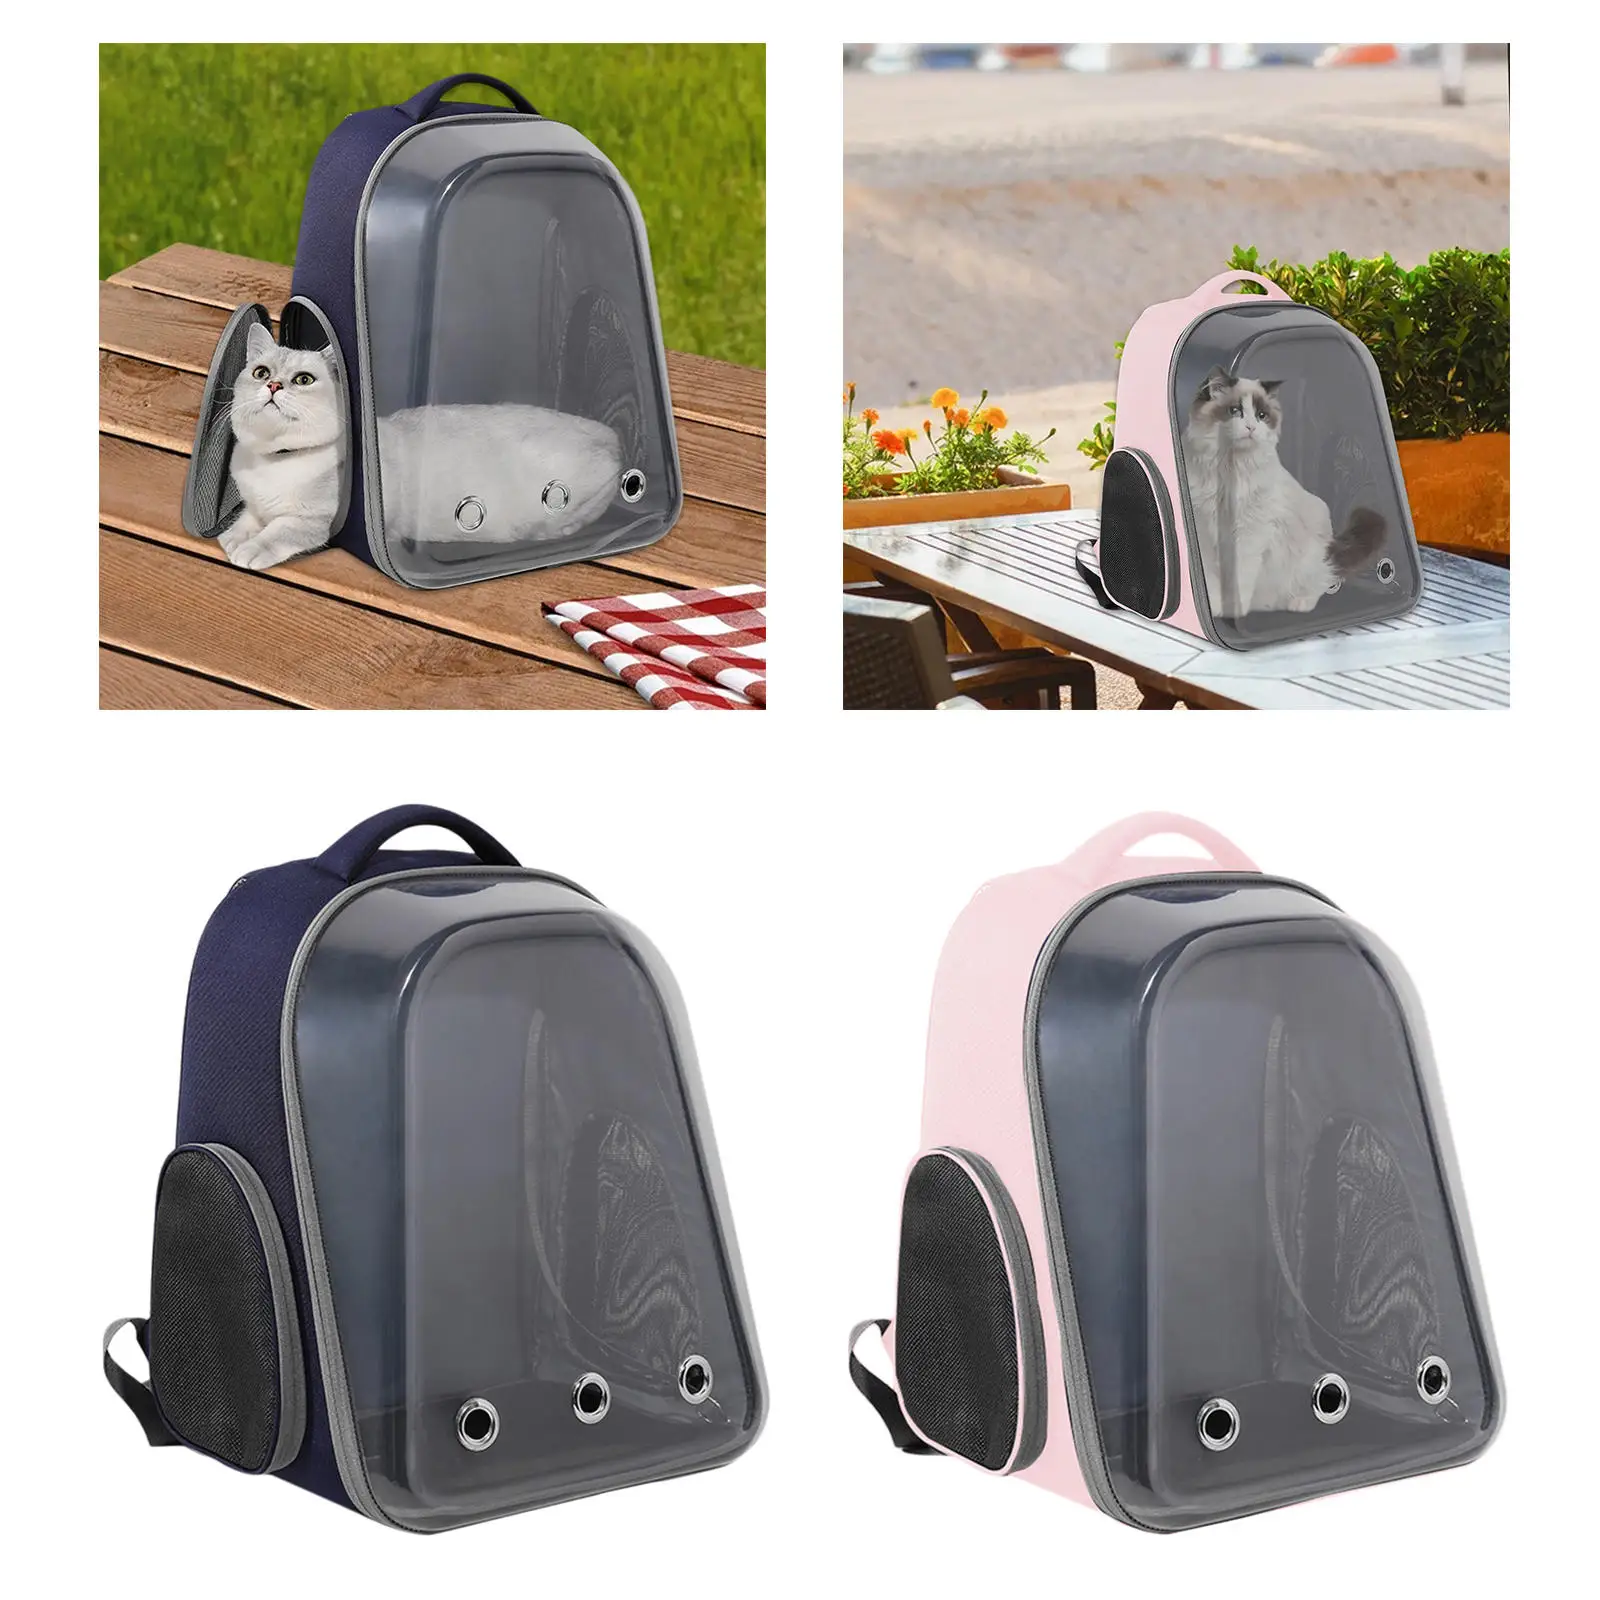 Comfortable Pet Dog&Cat Carrier Backpack Handbag for Small Cute Cat Dog Travel Hiking Use